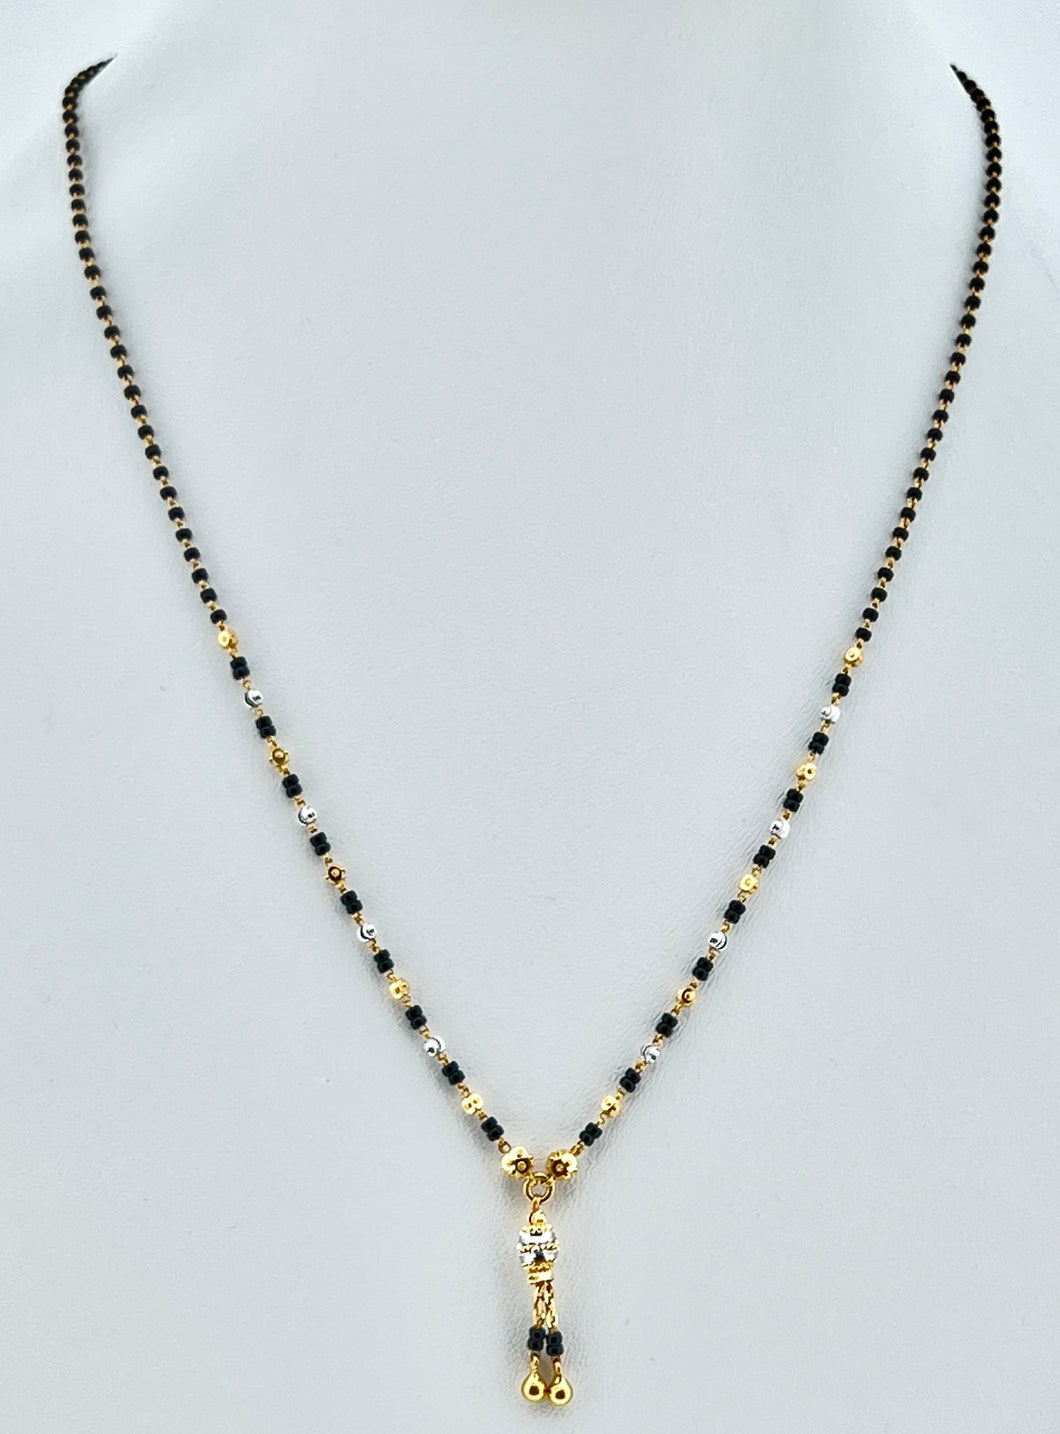 22K Solid Gold Two Tone Mangalsutra C4613 - Royal Dubai Jewellers